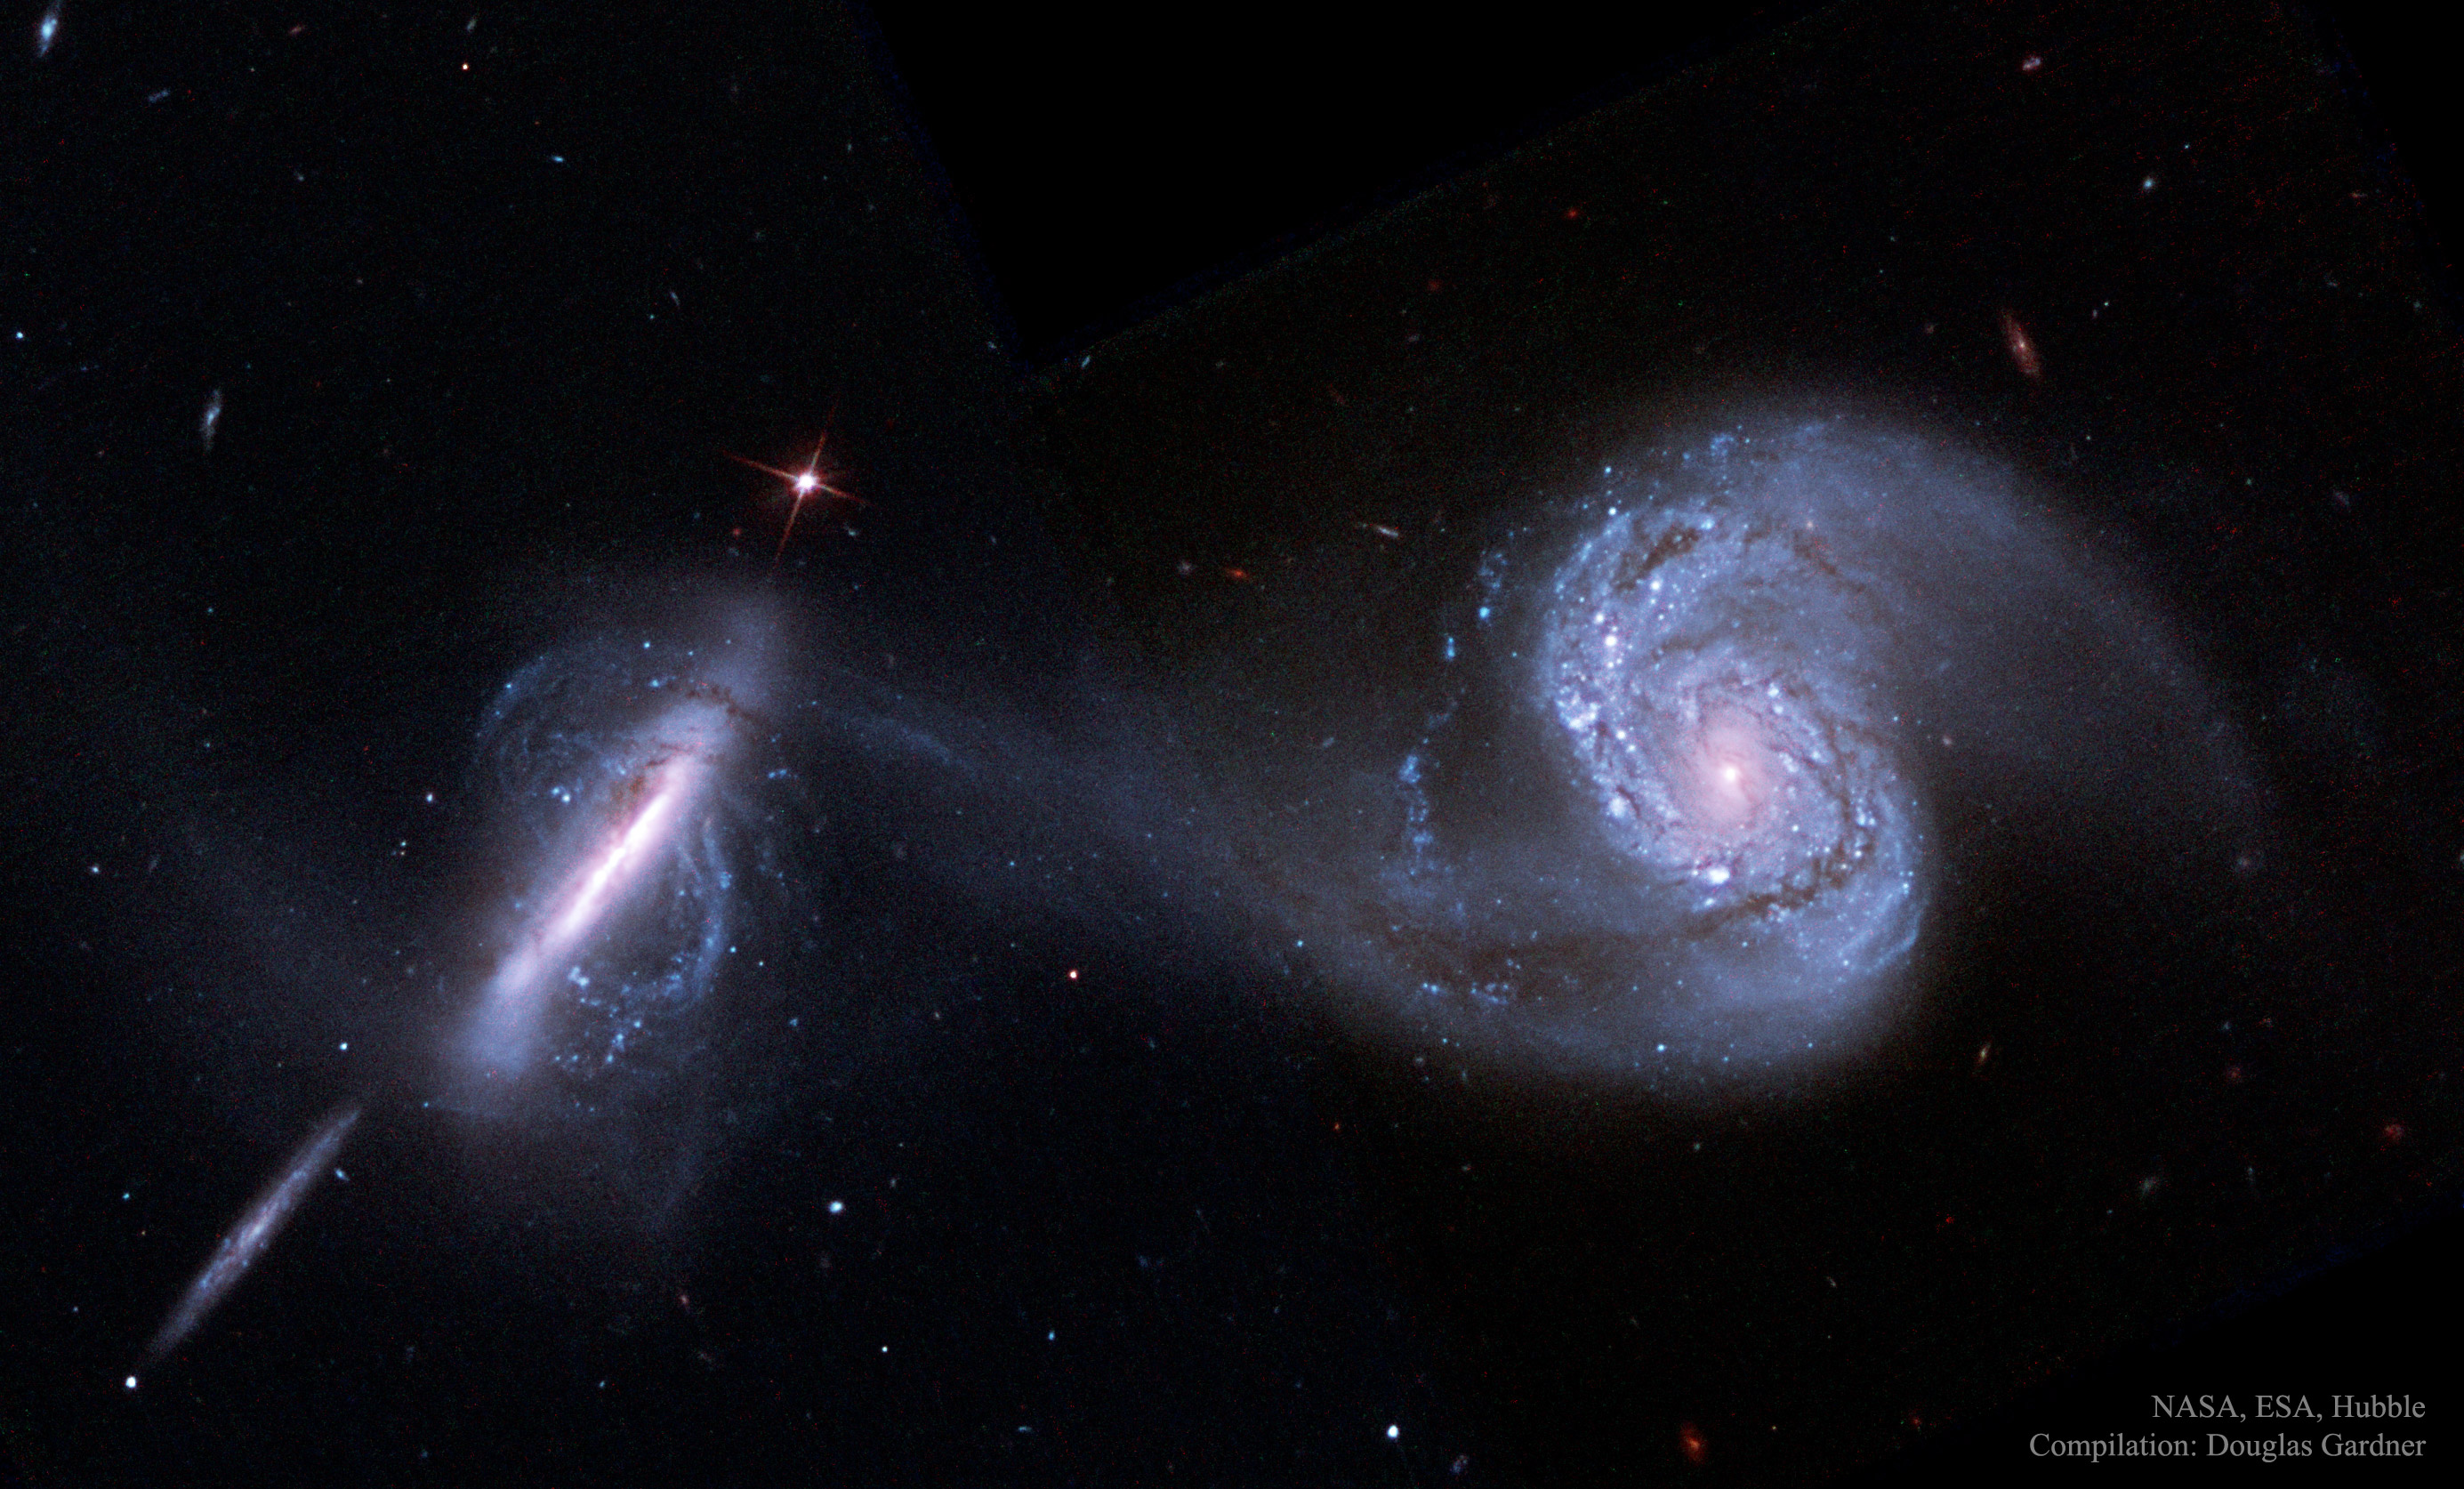 Arp 87: Merging Galaxies from Hubble